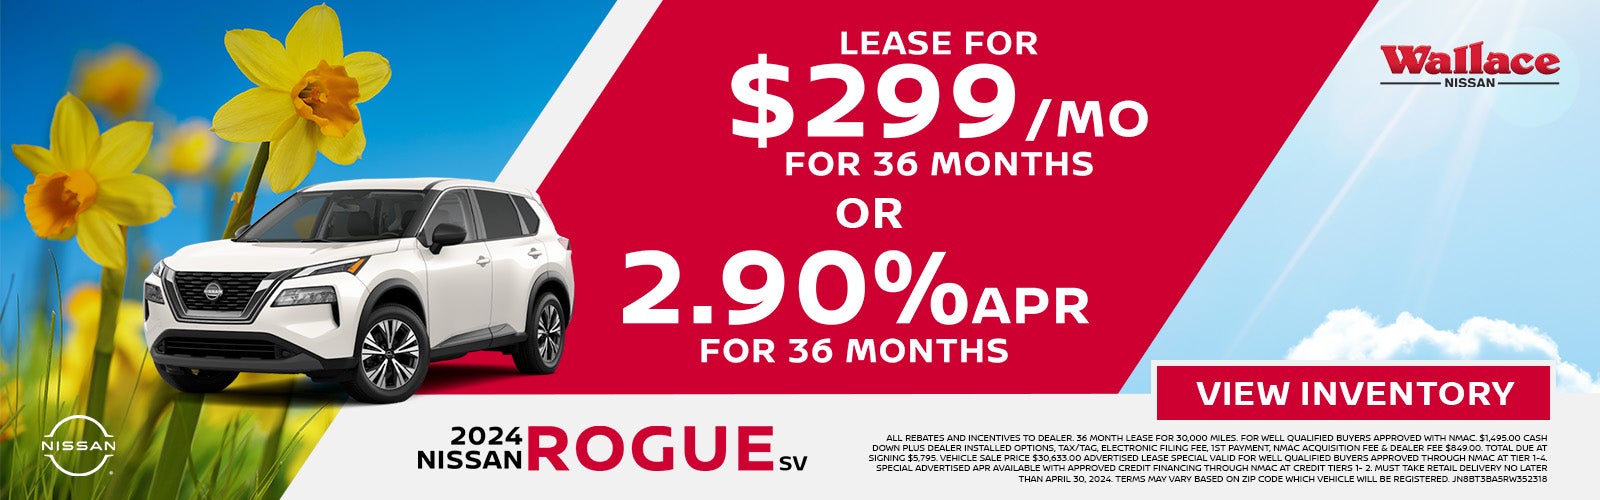 Nissan Rogue Special Offer